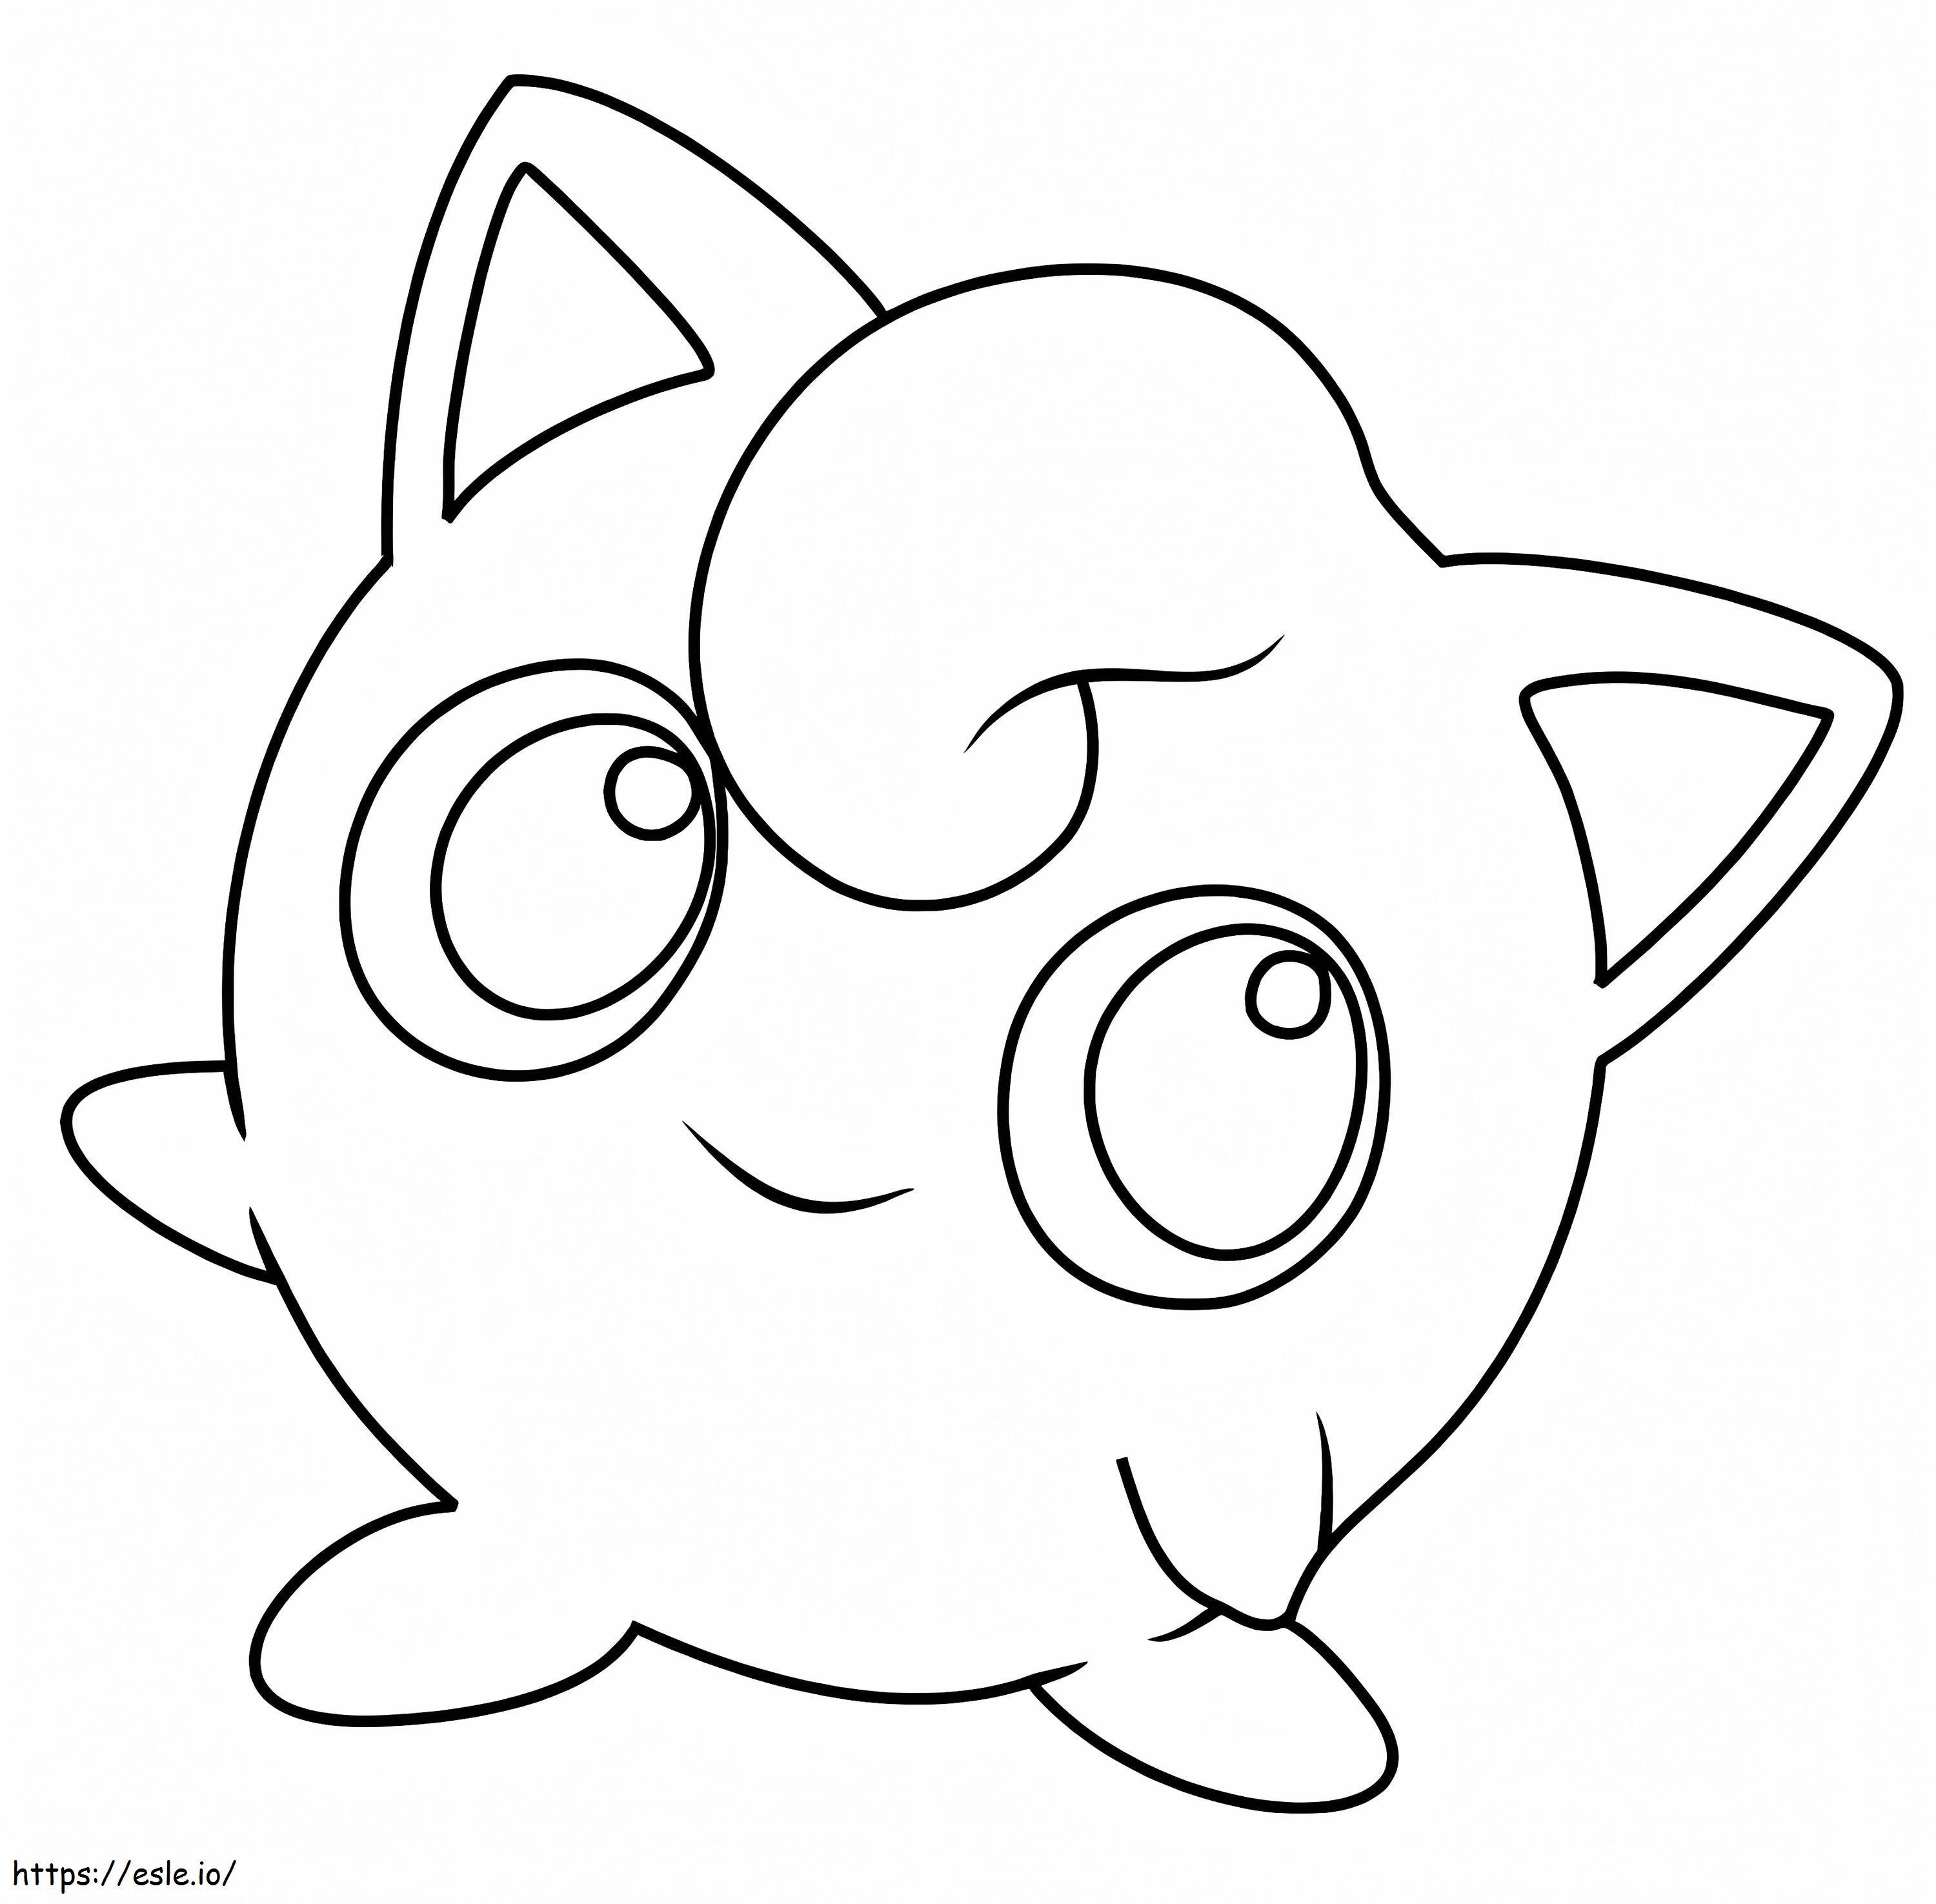 Adorable Jigglypuff coloring page